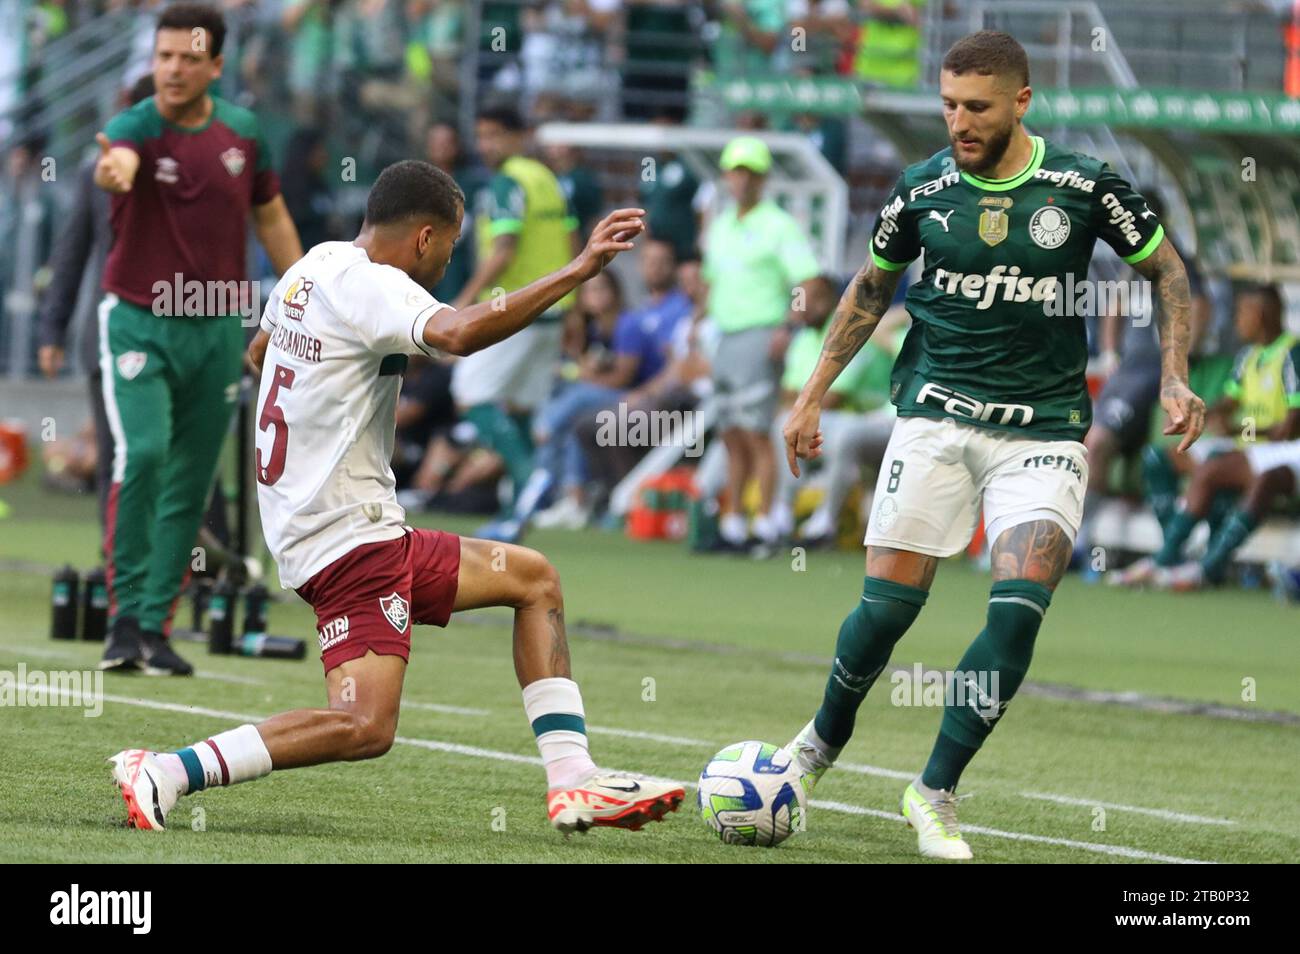 Zé Rafael of Palmeiras during the match against Fluminense, in the 37th round of the Brazilian Championship, at Allianz Parque, west of São Paulo, this Sunday, November 3, 2023. Credit: Brazil Photo Press/Alamy Live News Stock Photo